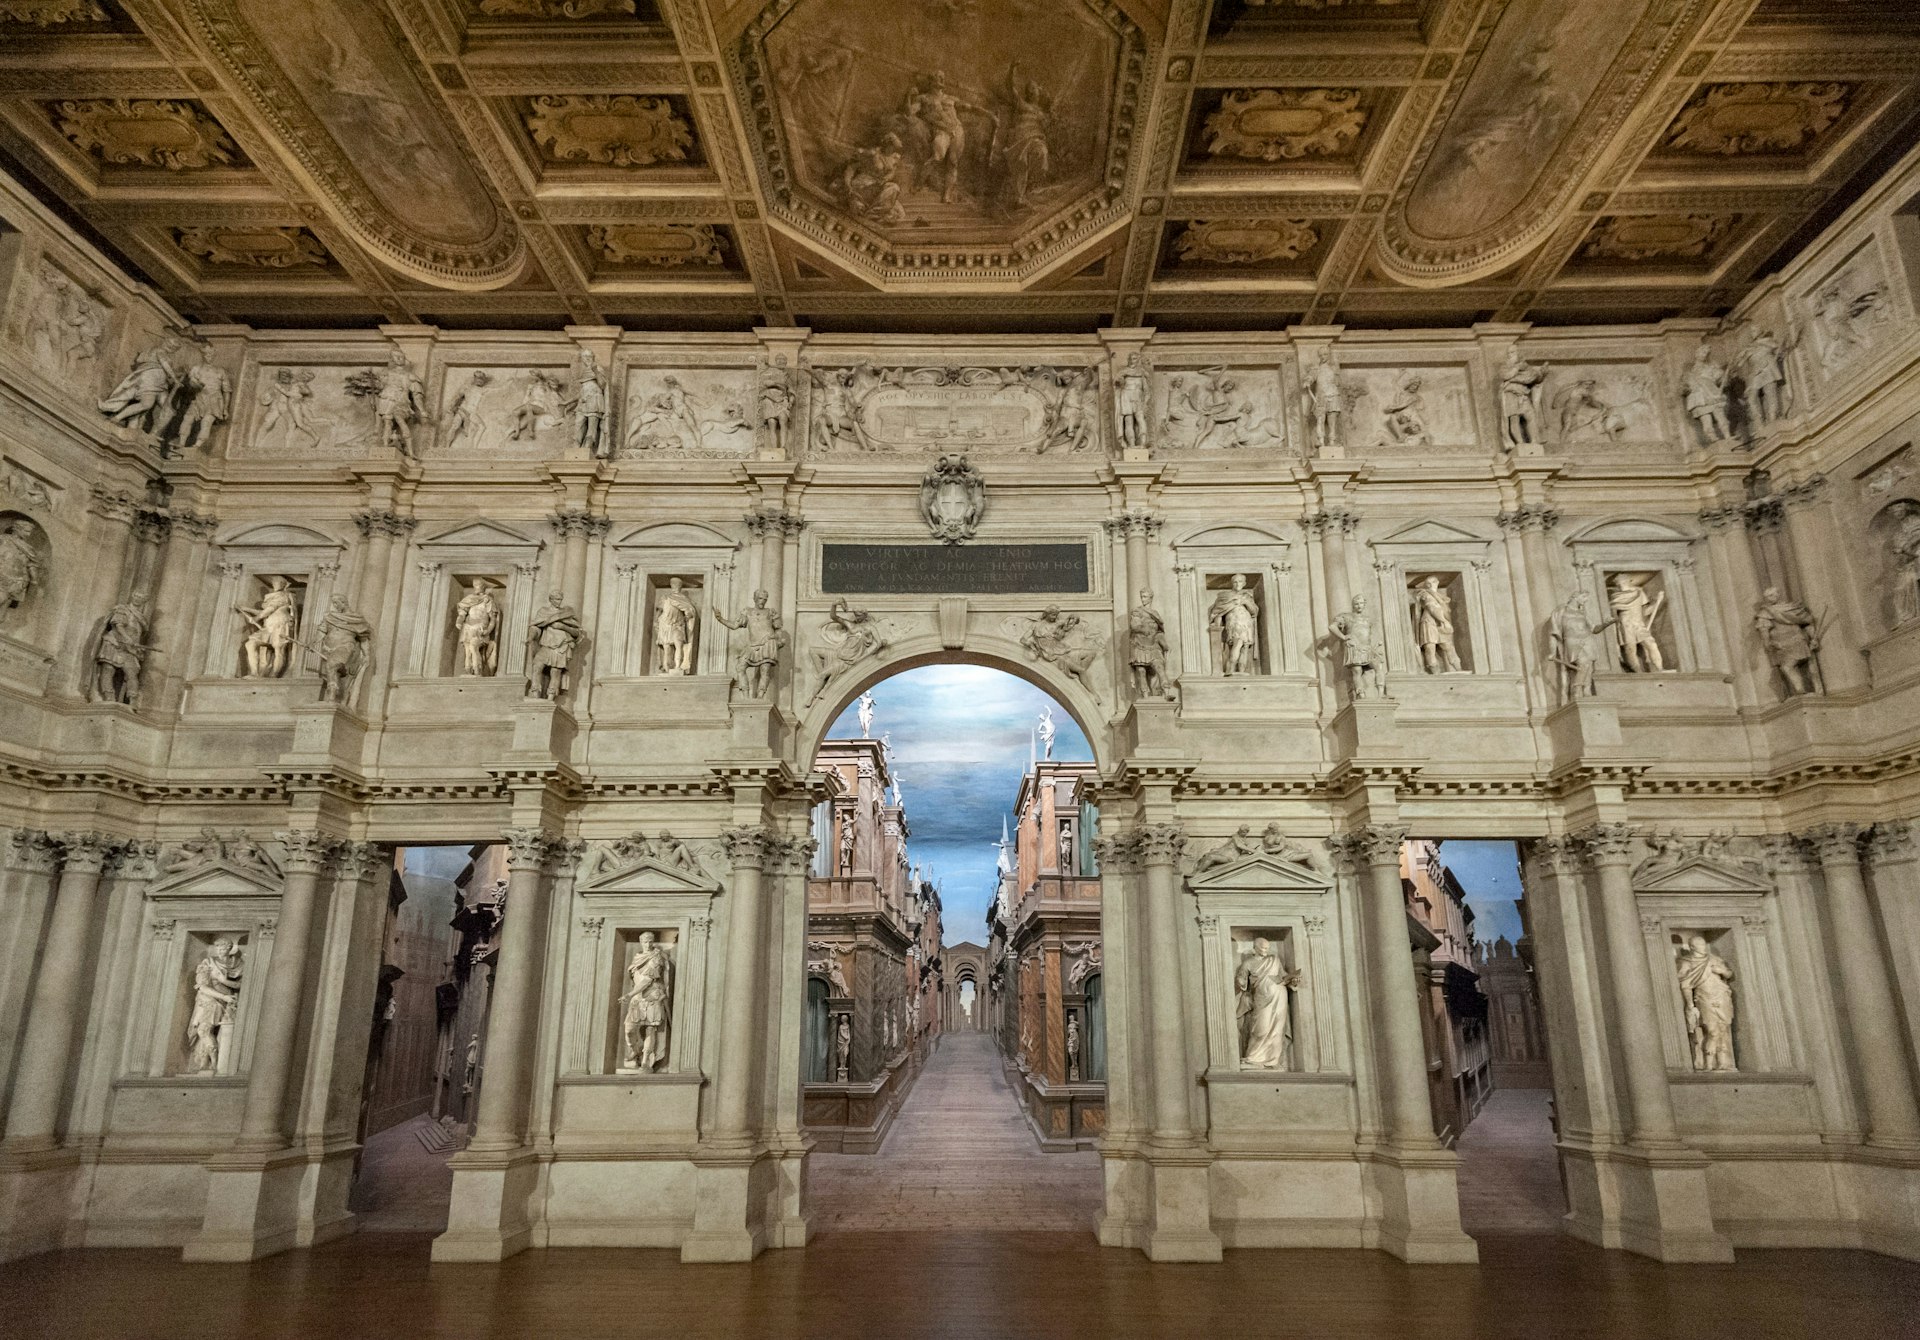  Interior of the Olympic theatre (teatro olimpico), the oldest surviving stage set of the renaissance period that is still in existence.